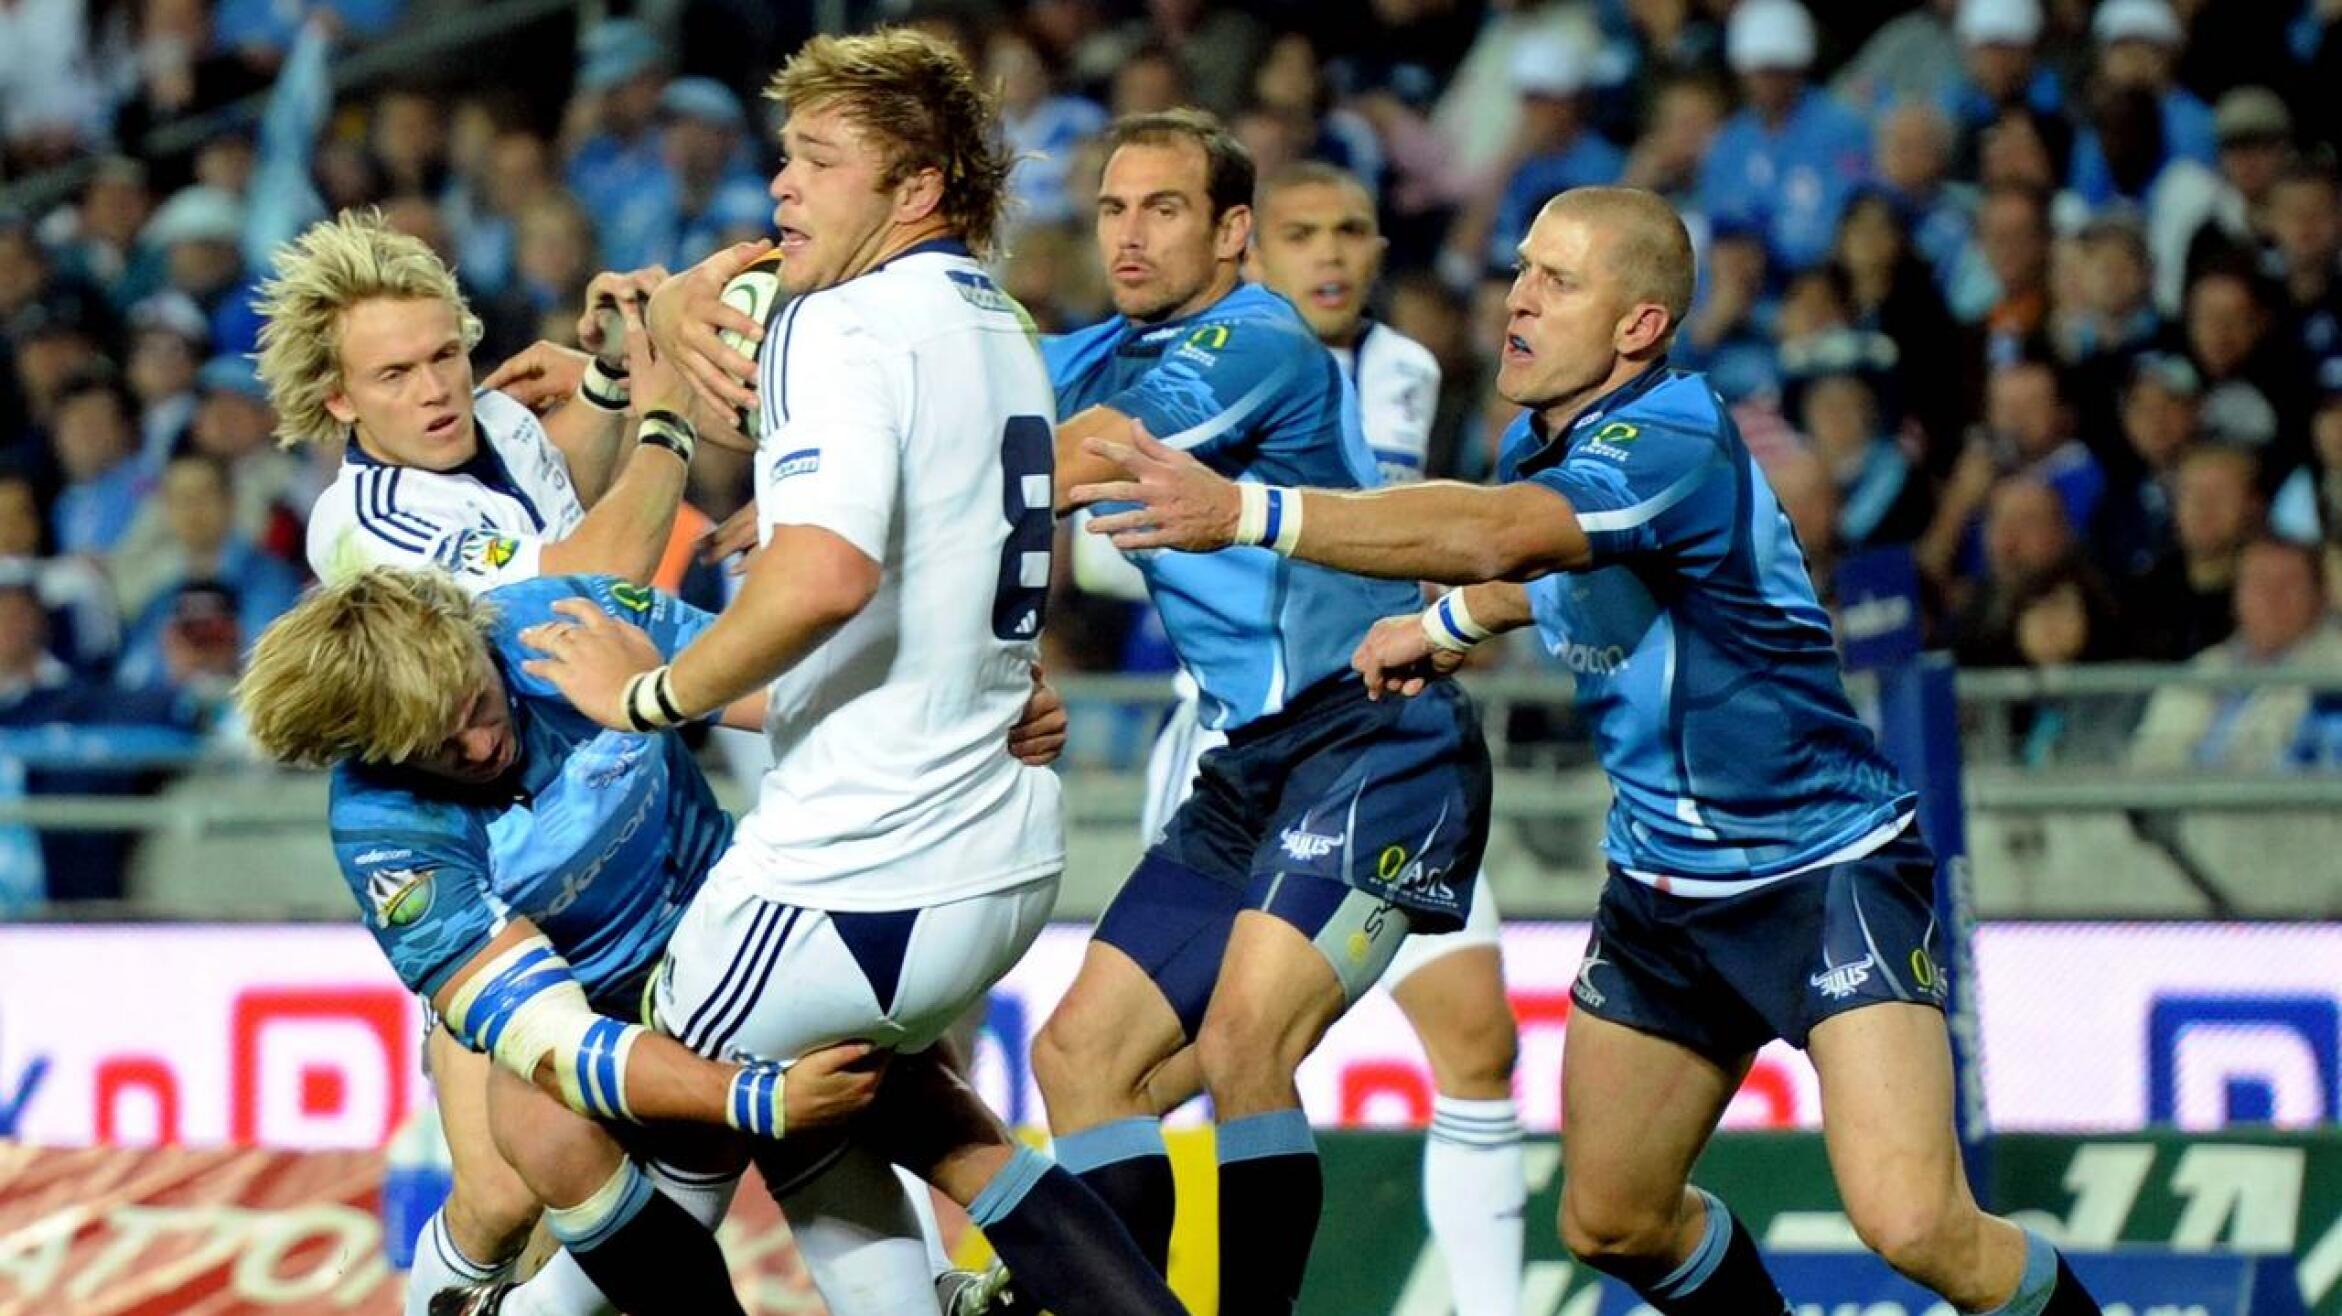 Duane Vermeulen is tackled by Wynand Olivier during the 2010 Super Rugby final at Orlando Stadium.